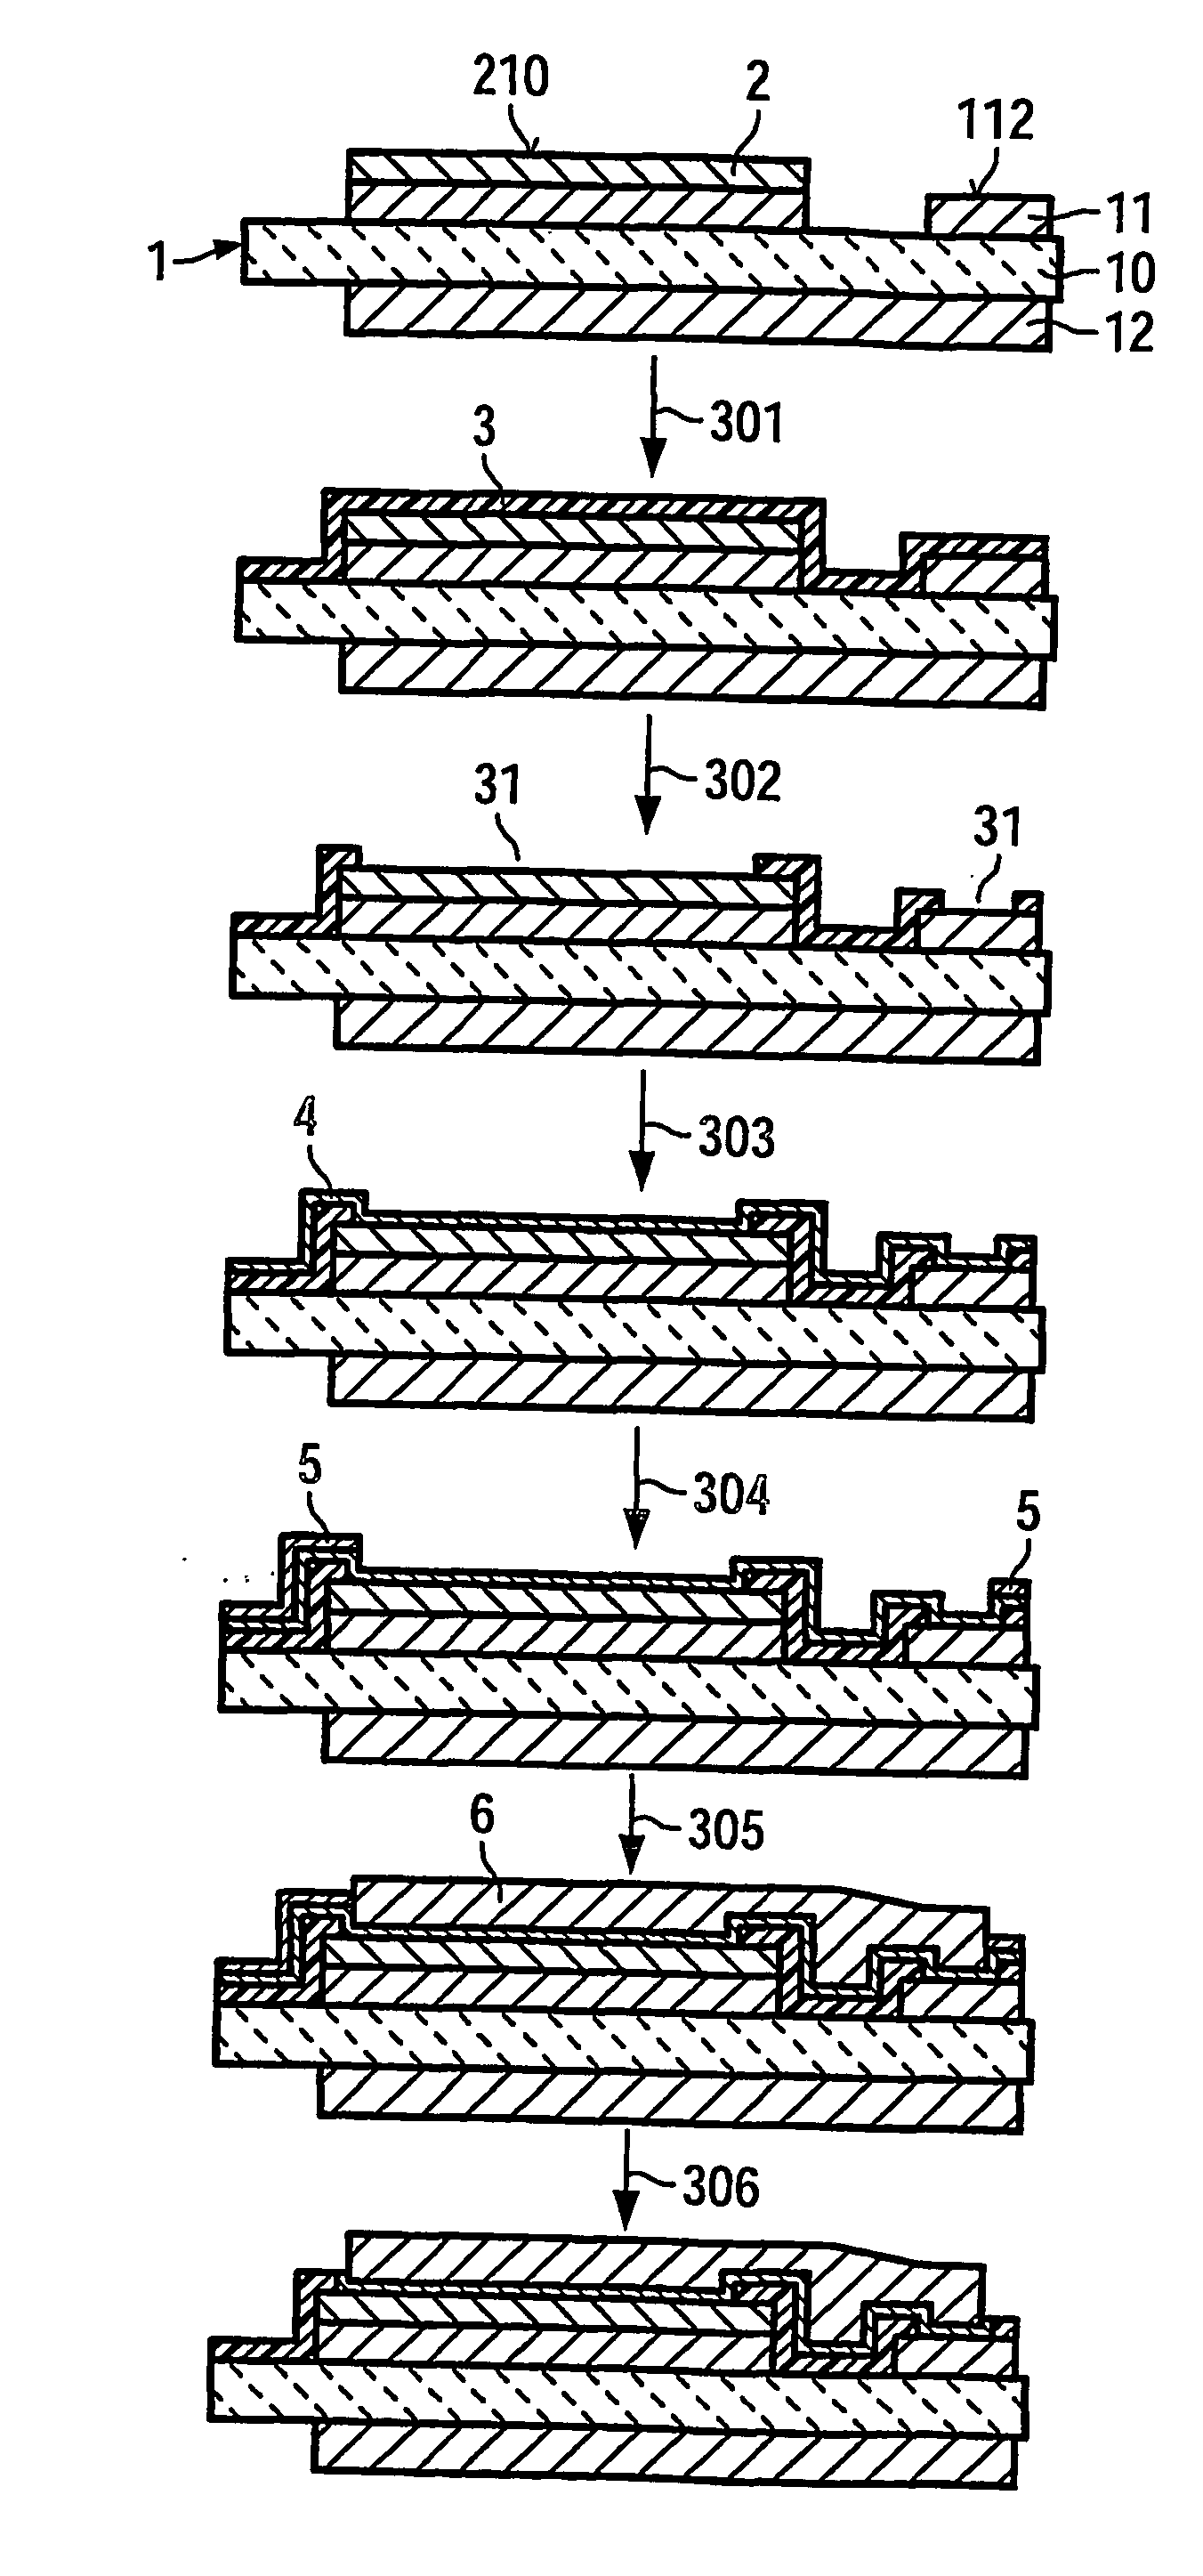 Connection technology for power semiconductors comprising a layer of electrically insulating material that follows the surface contours